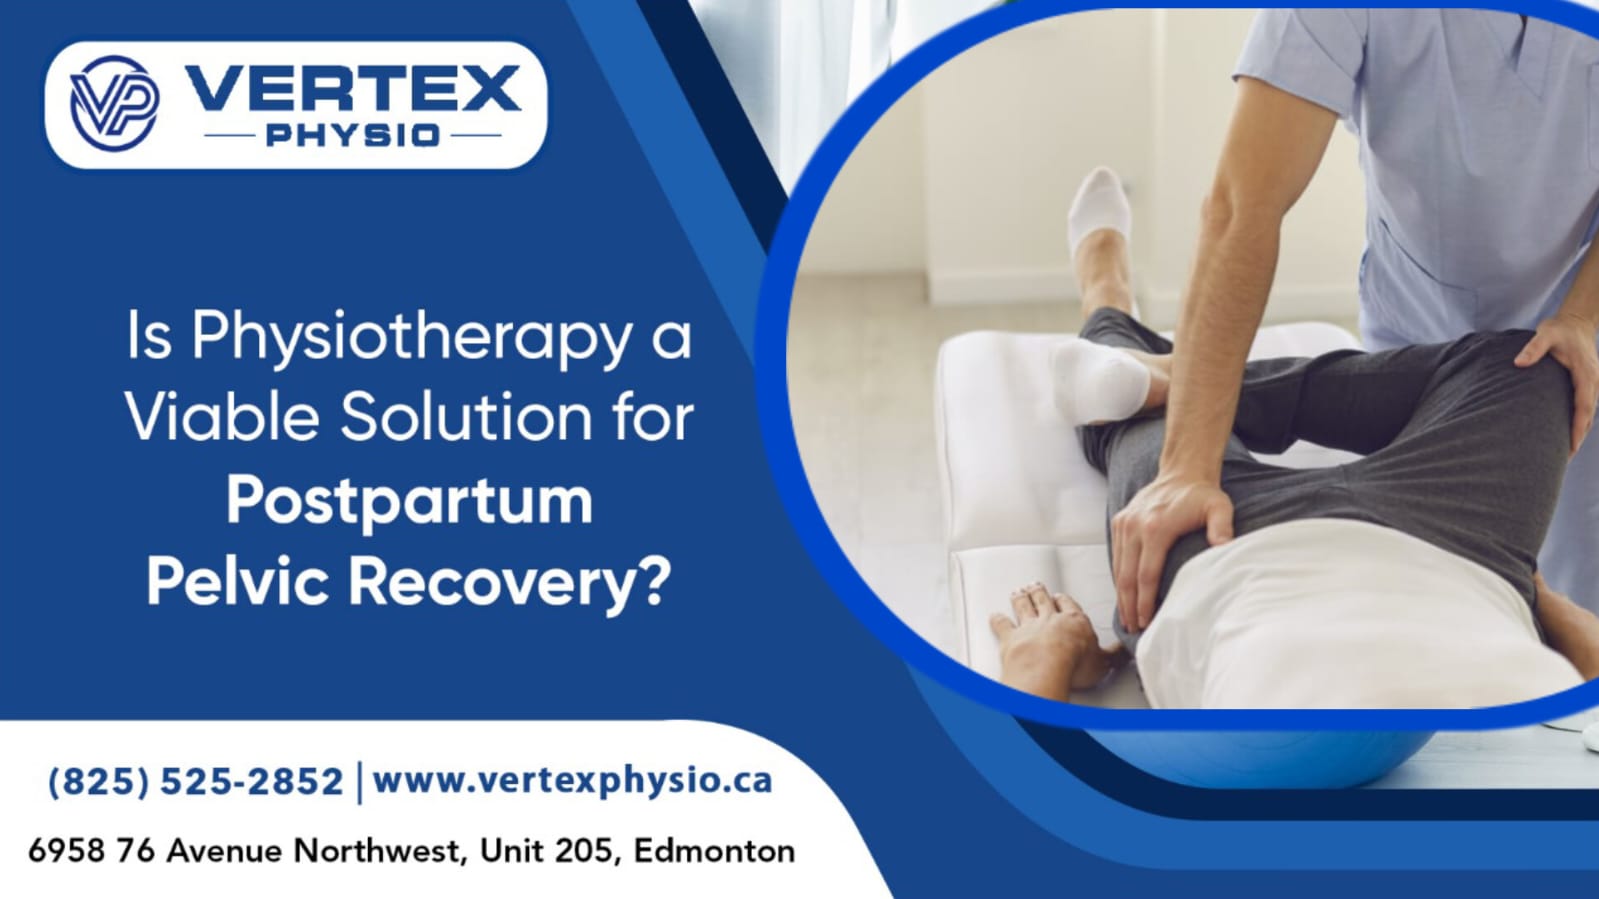 Is Physiotherapy a Viable Solution for Postpartum Pelvic Recovery? - mayocourse